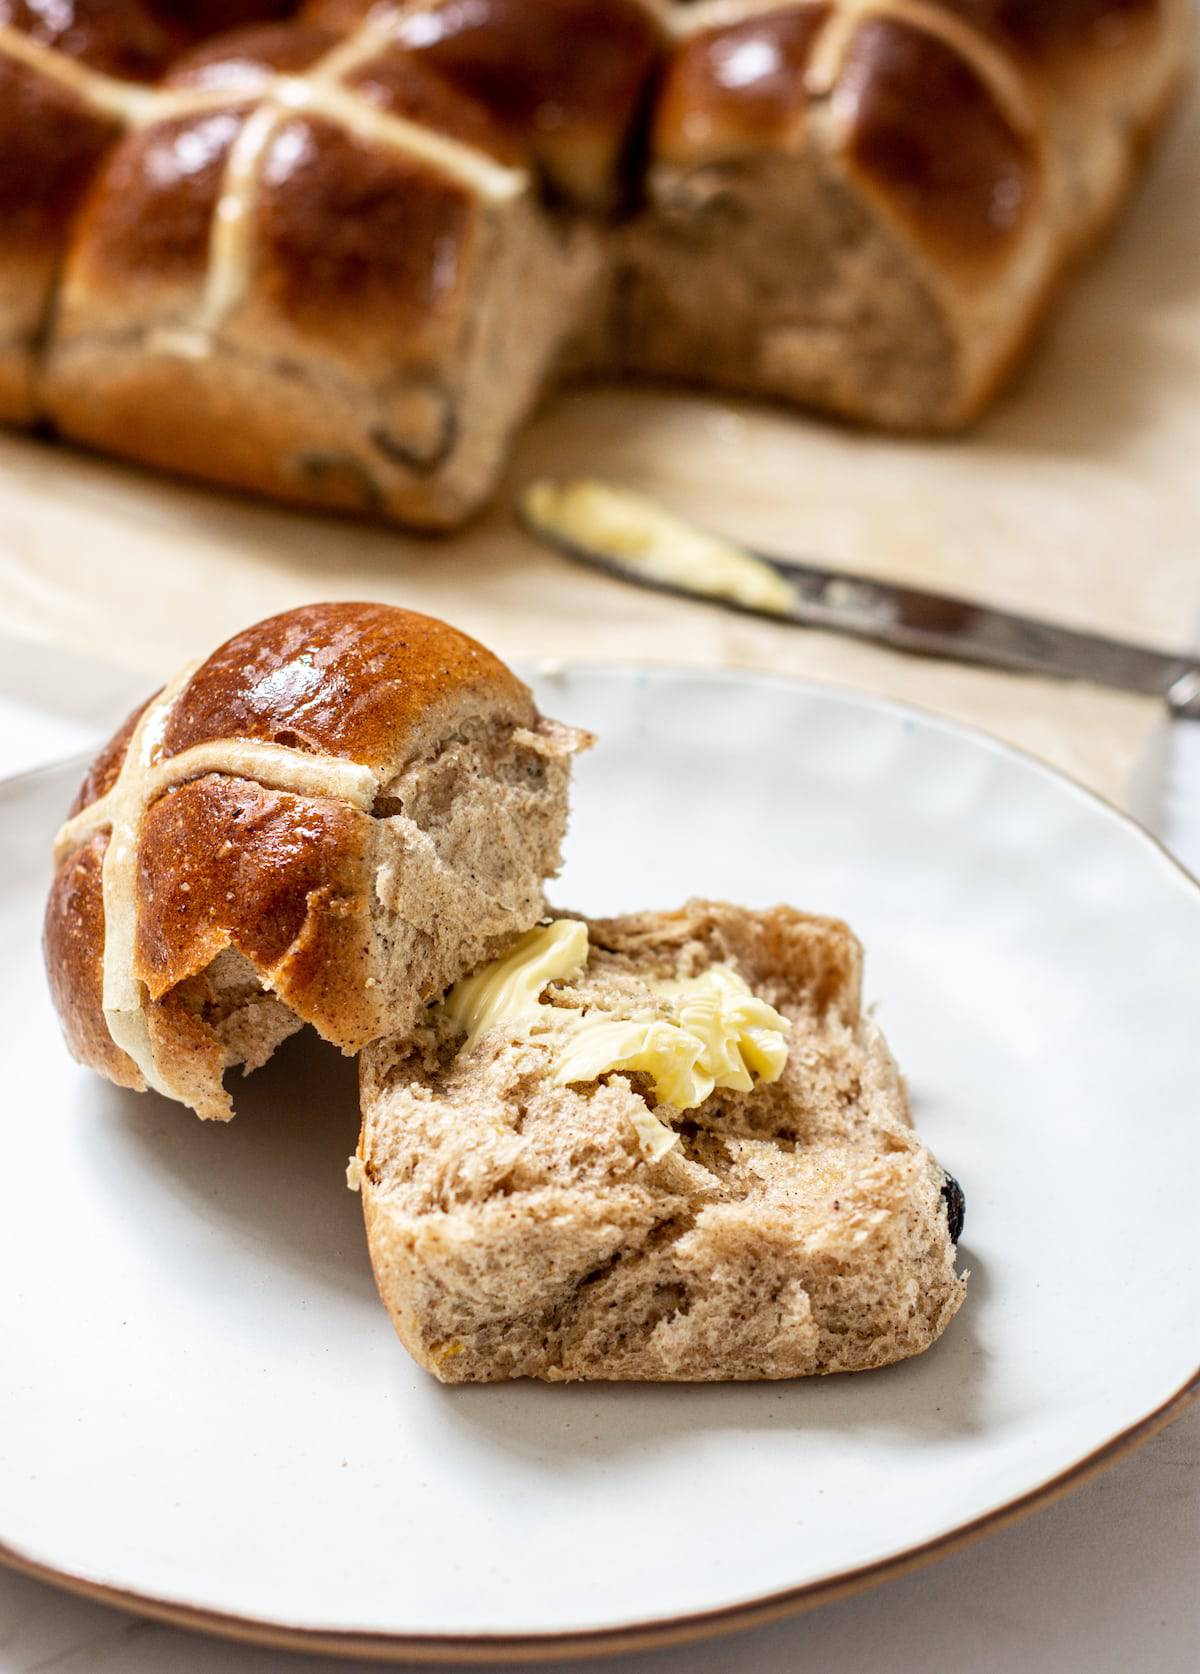 a plate with a buttered hot cross bun, other buns are in the background